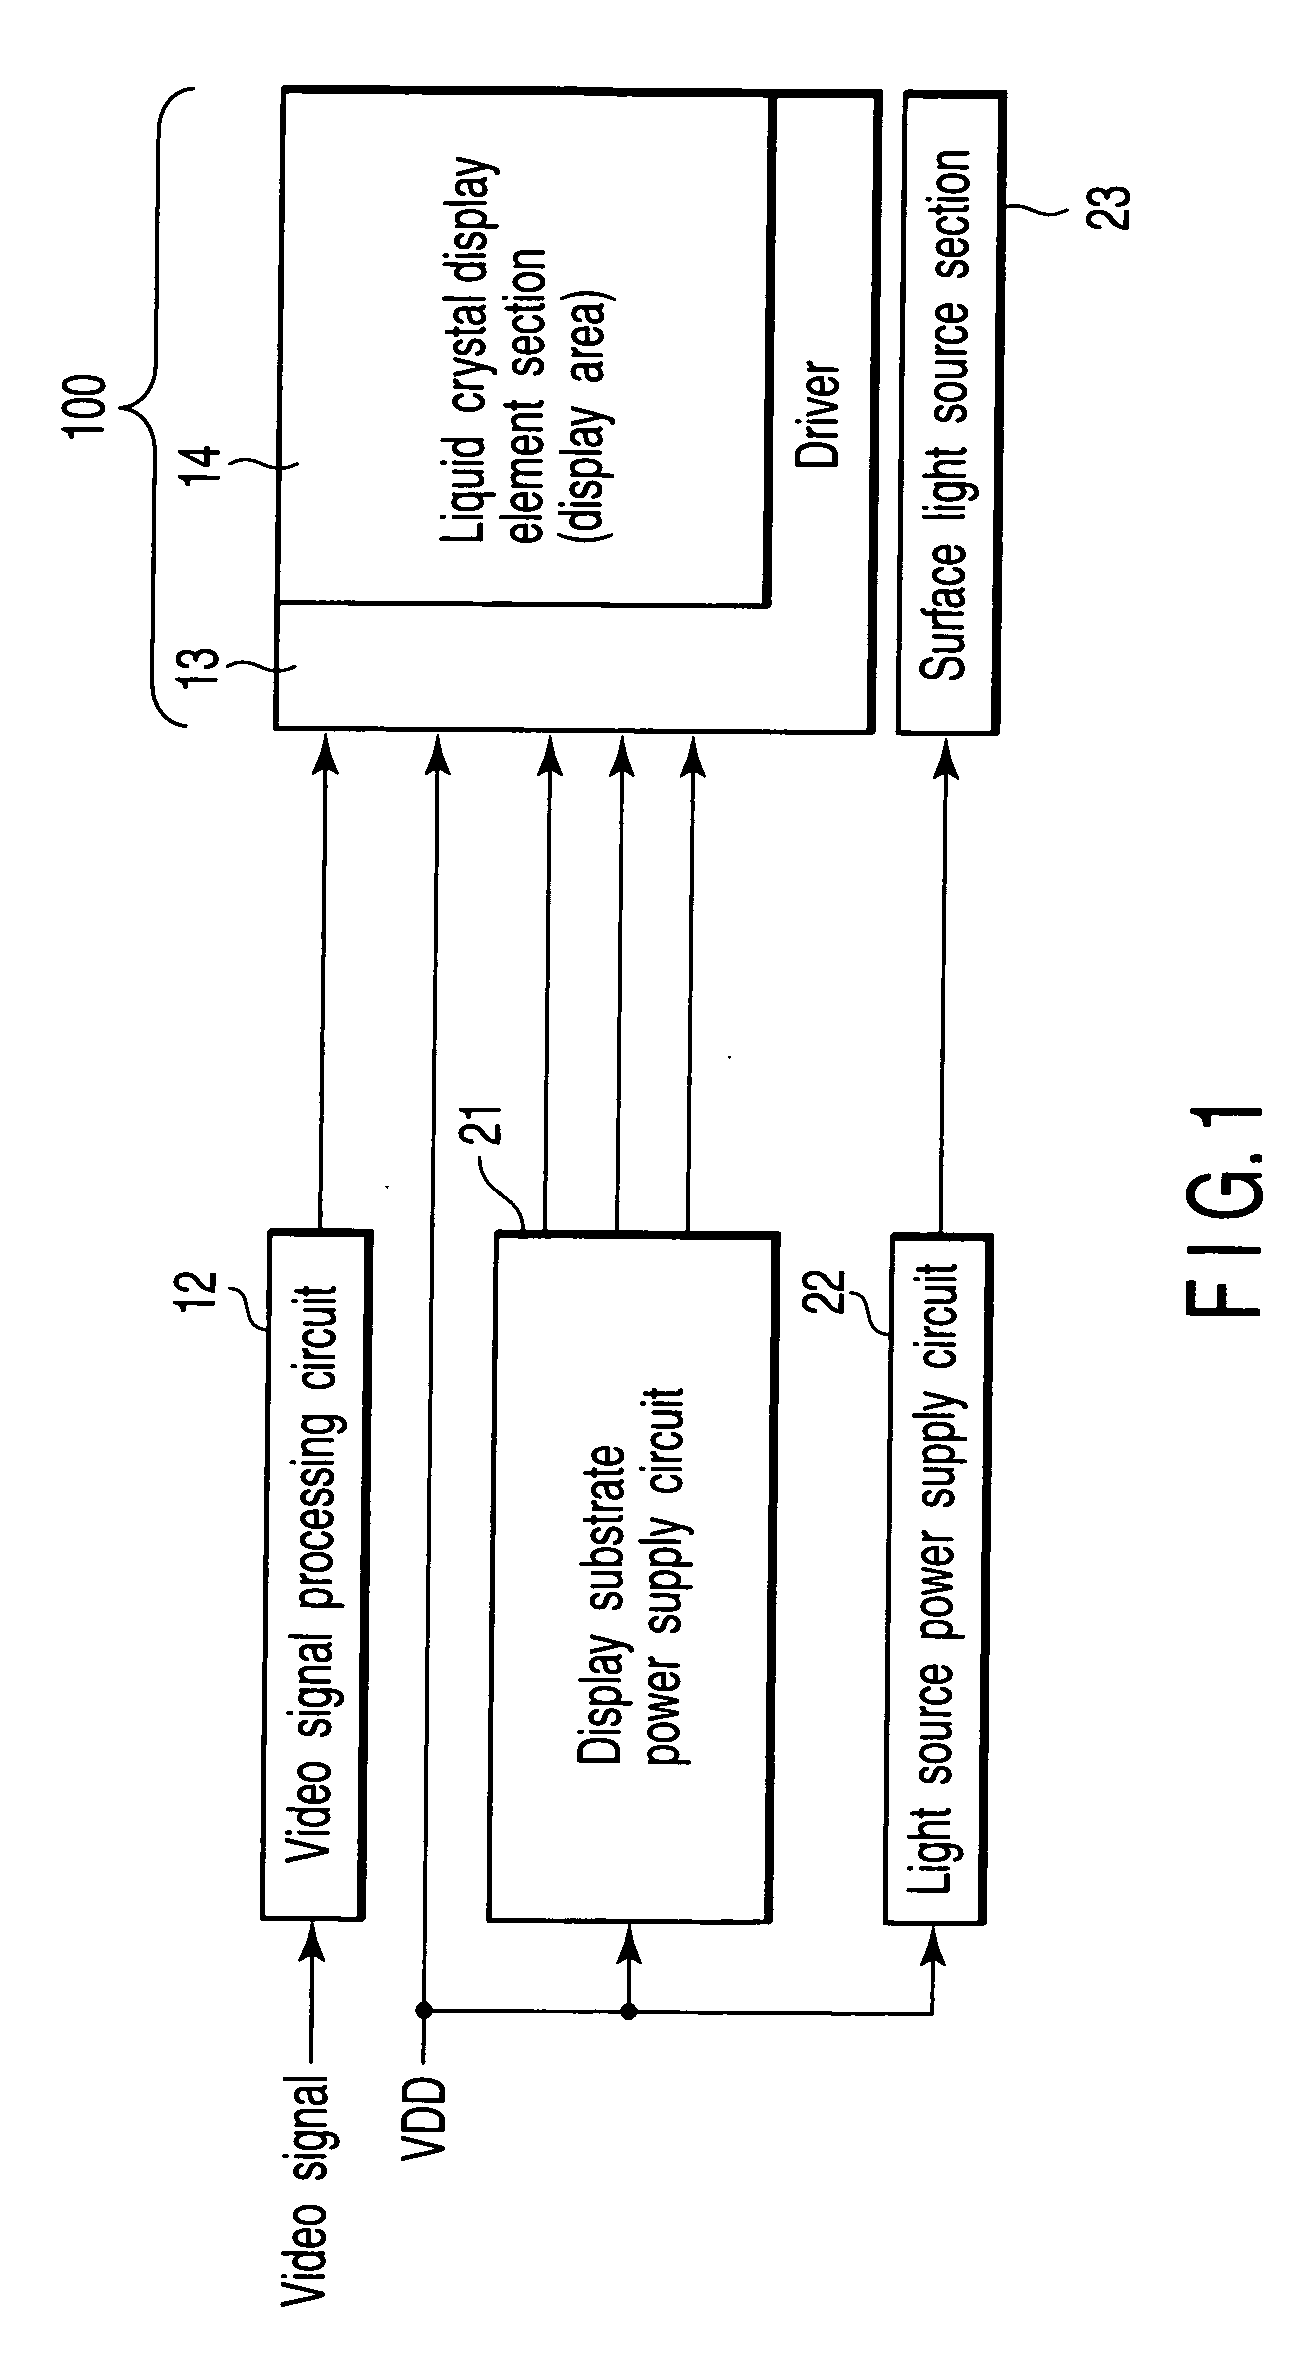 Surface light source control device